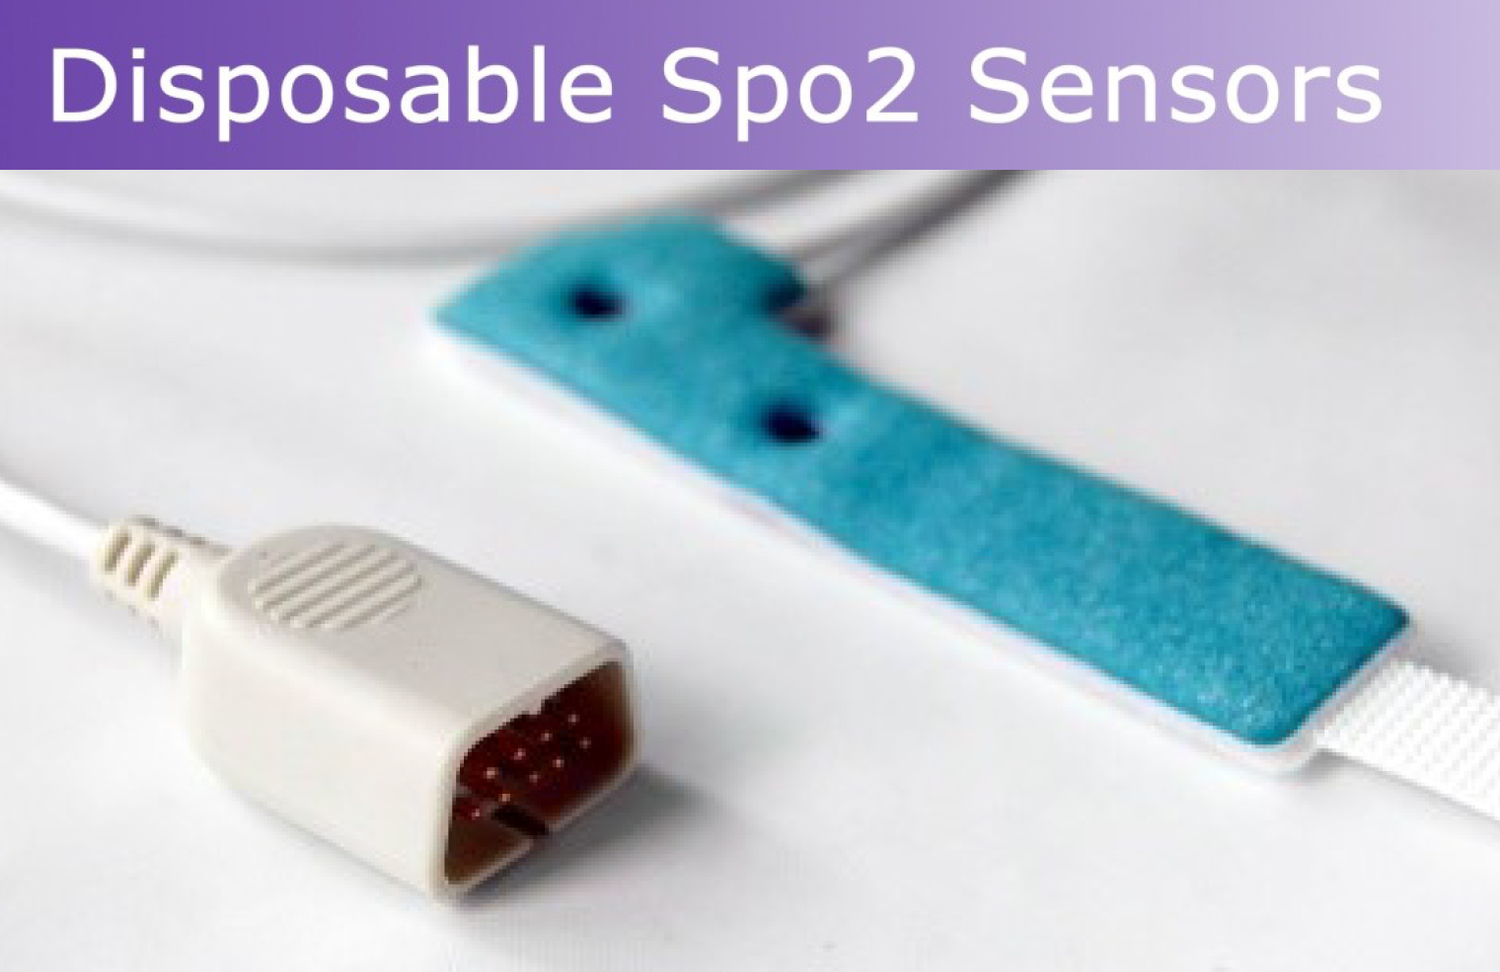 <p><span style="font-weight: bold;">Disposable Spo2 Sensors</span><br></p>